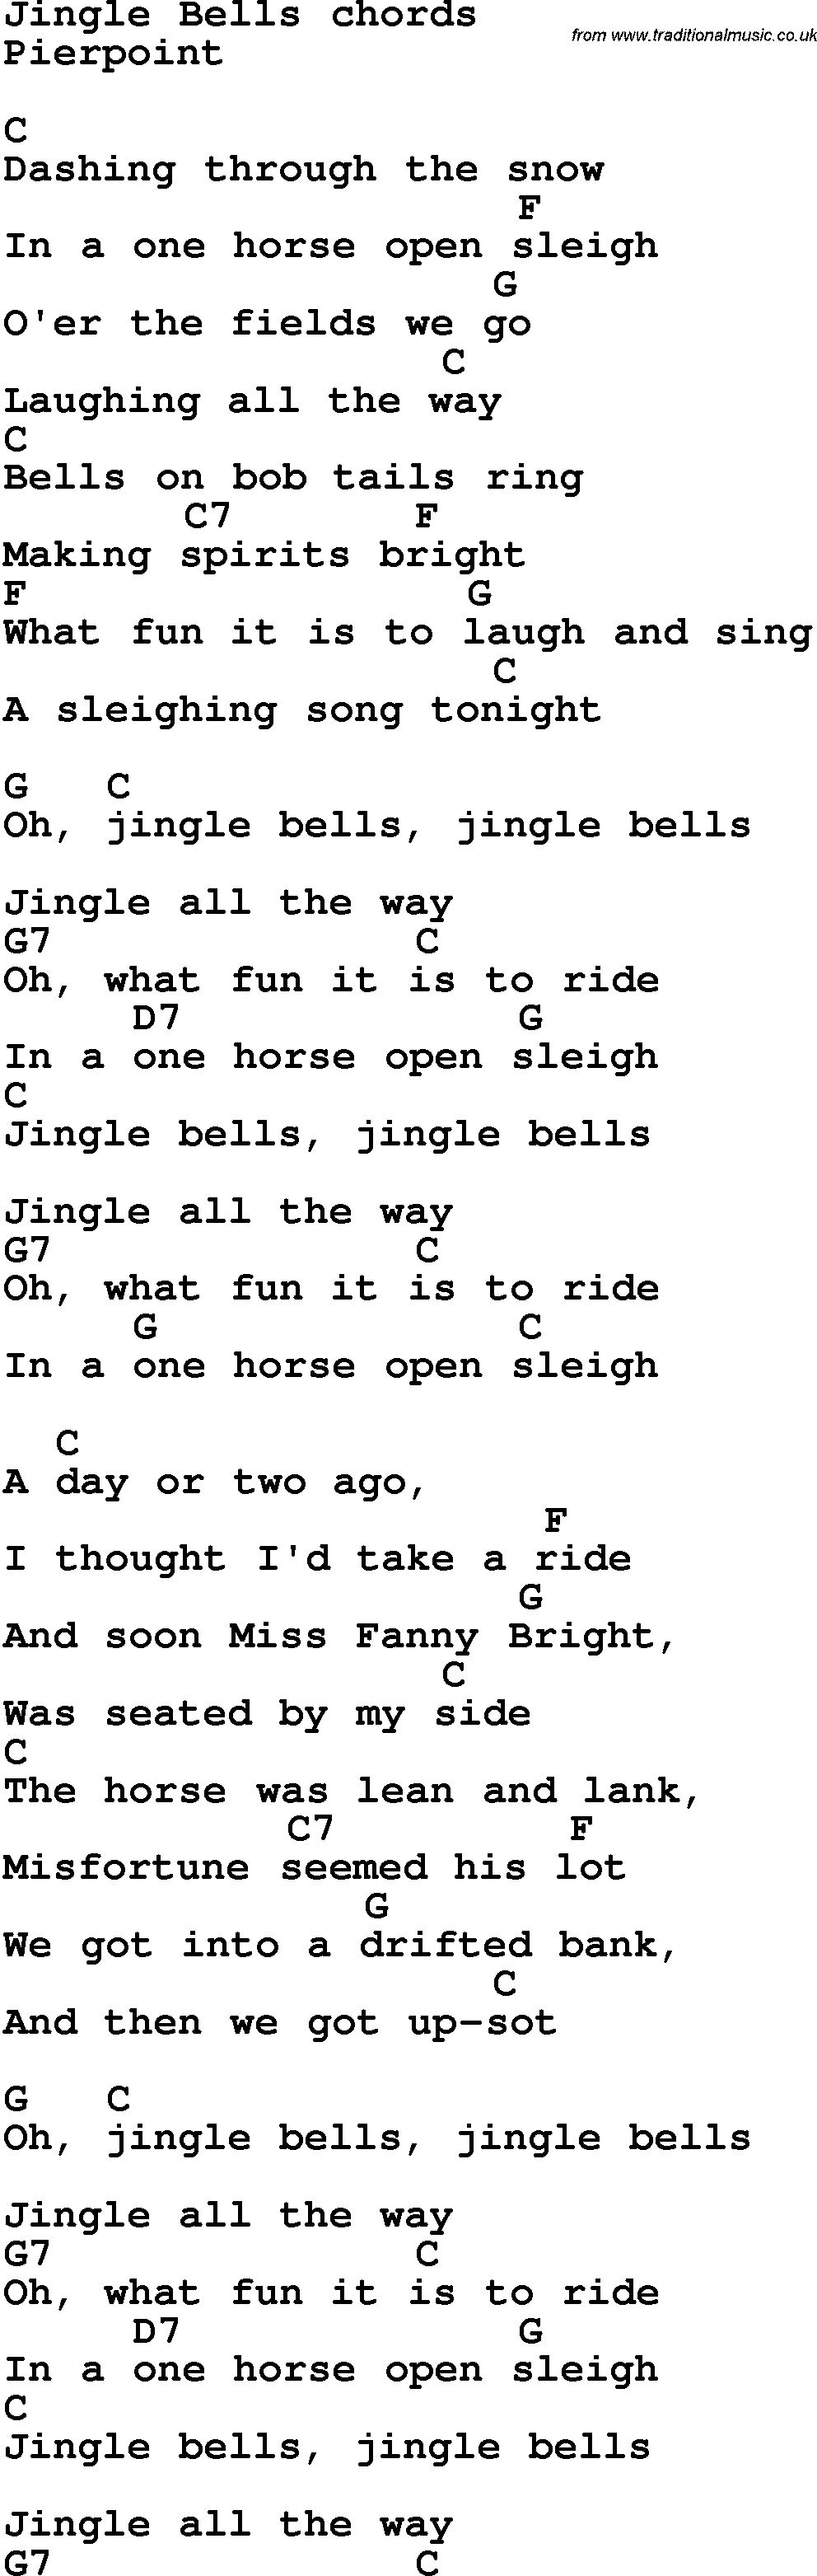 Jingle Bell Rock Chords Song Lyrics With Guitar Chords For Jingle Bells